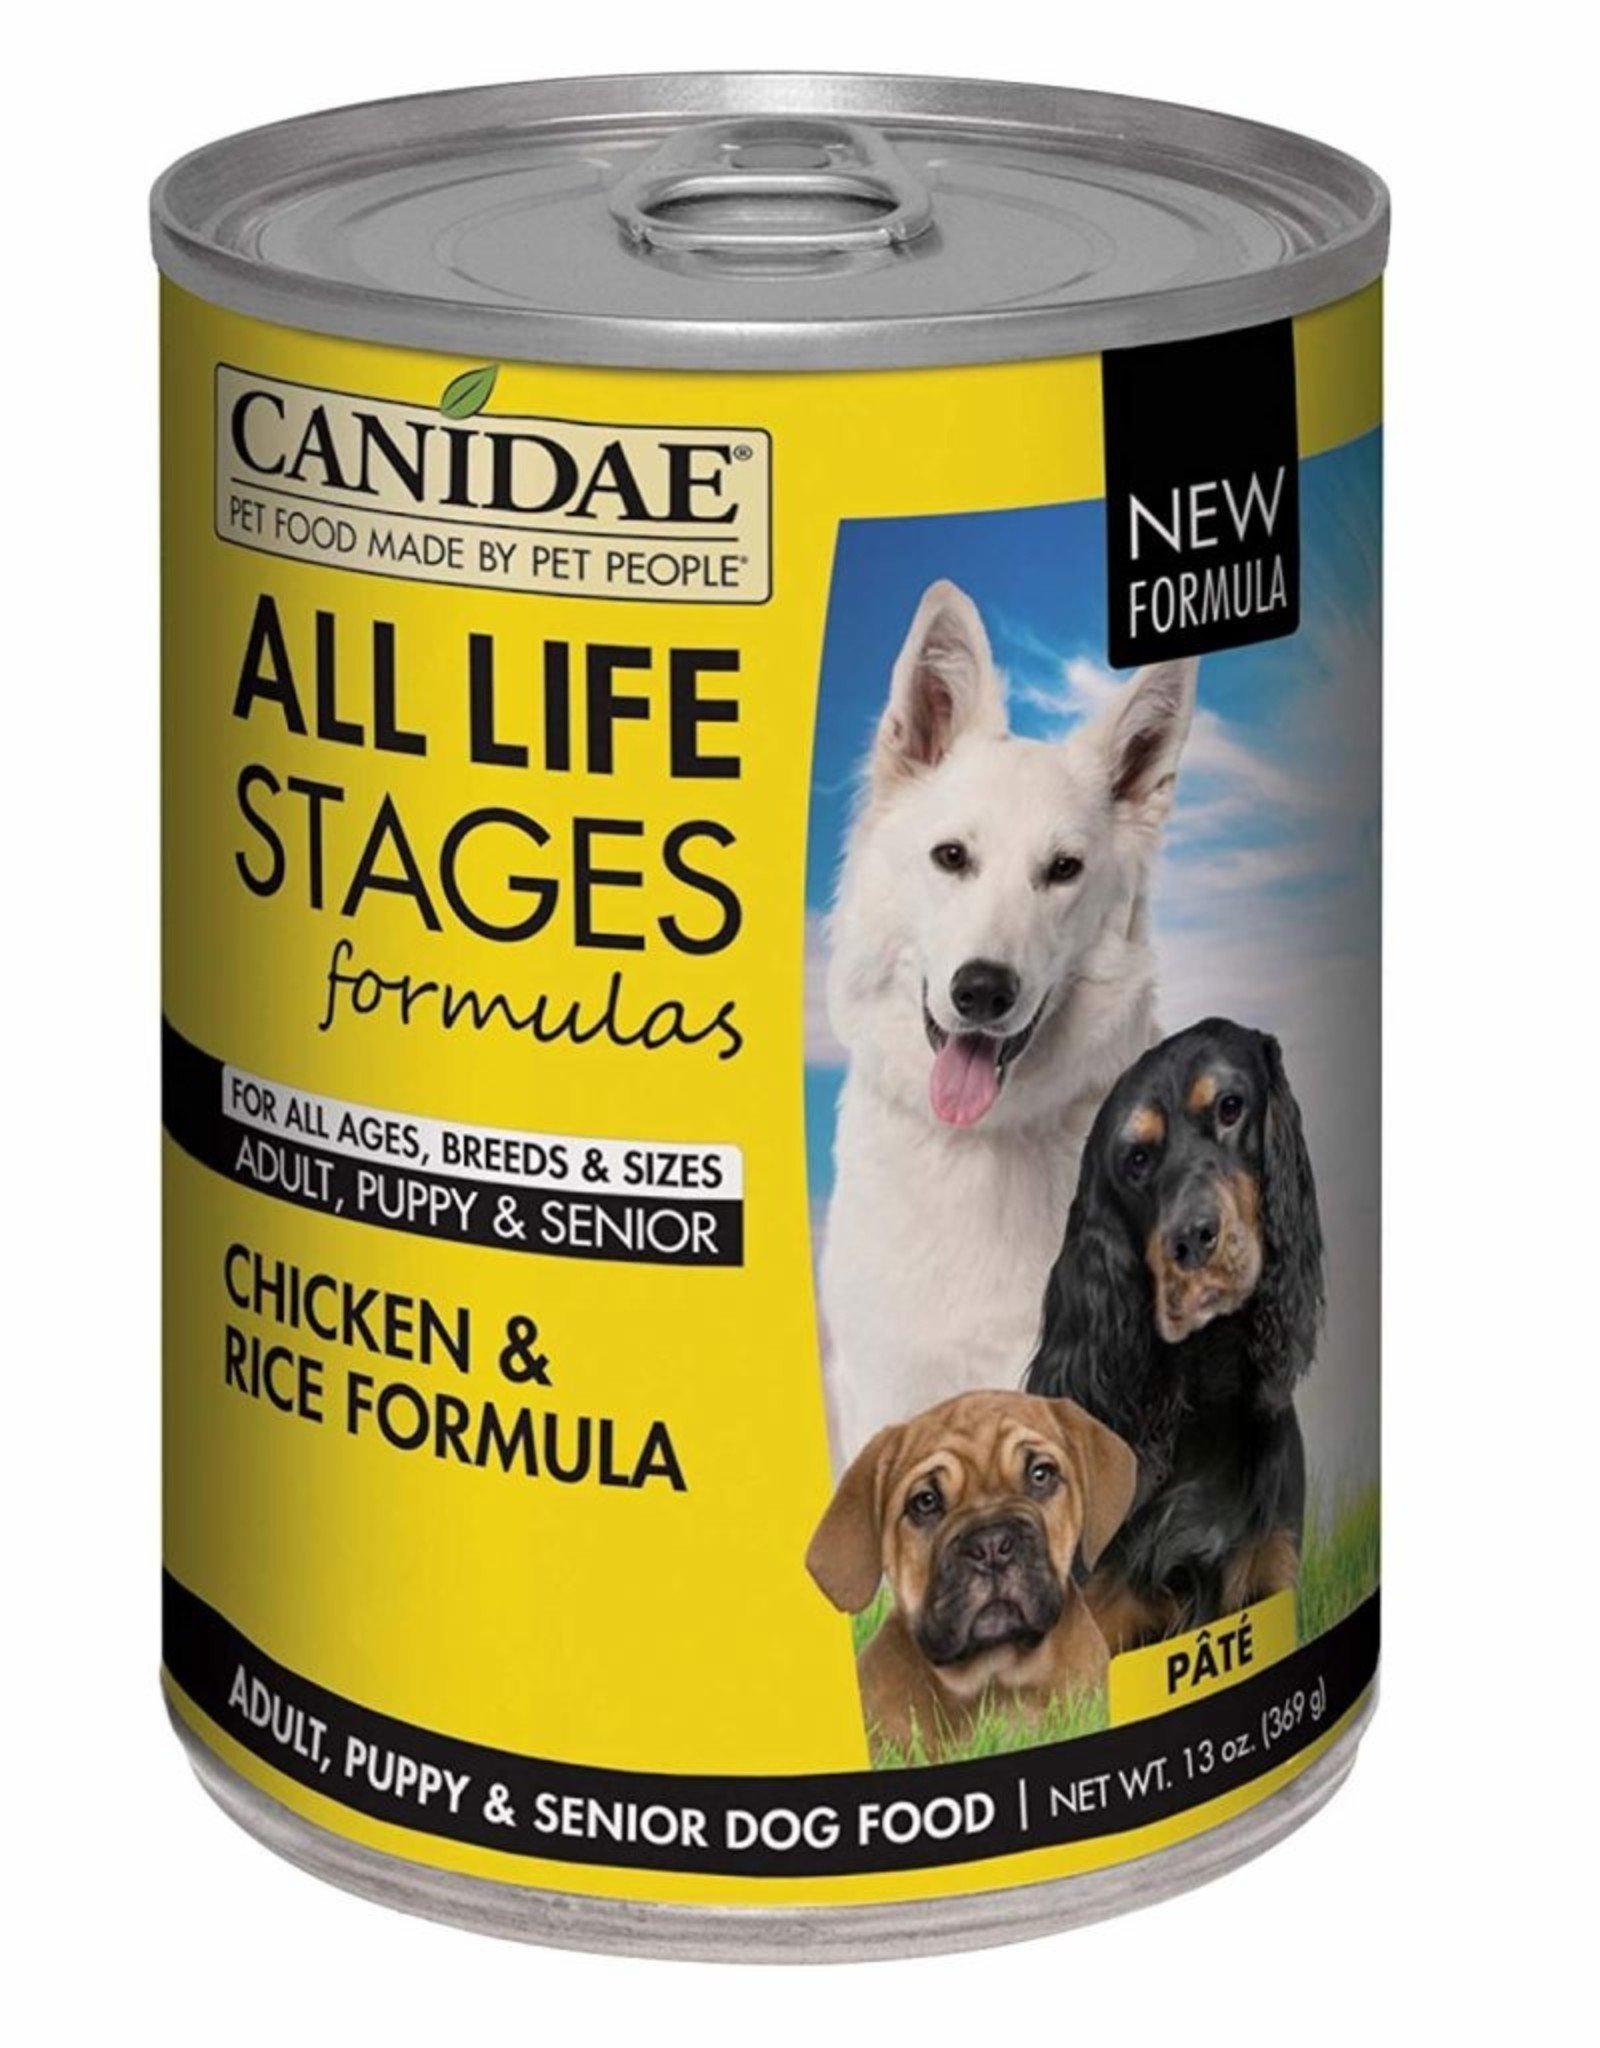 CANIDAE PET FOODS CANIDAE DOG CAN ALL LIFE STAGES CHICKEN & RICE 13 OZ CASE OF 12